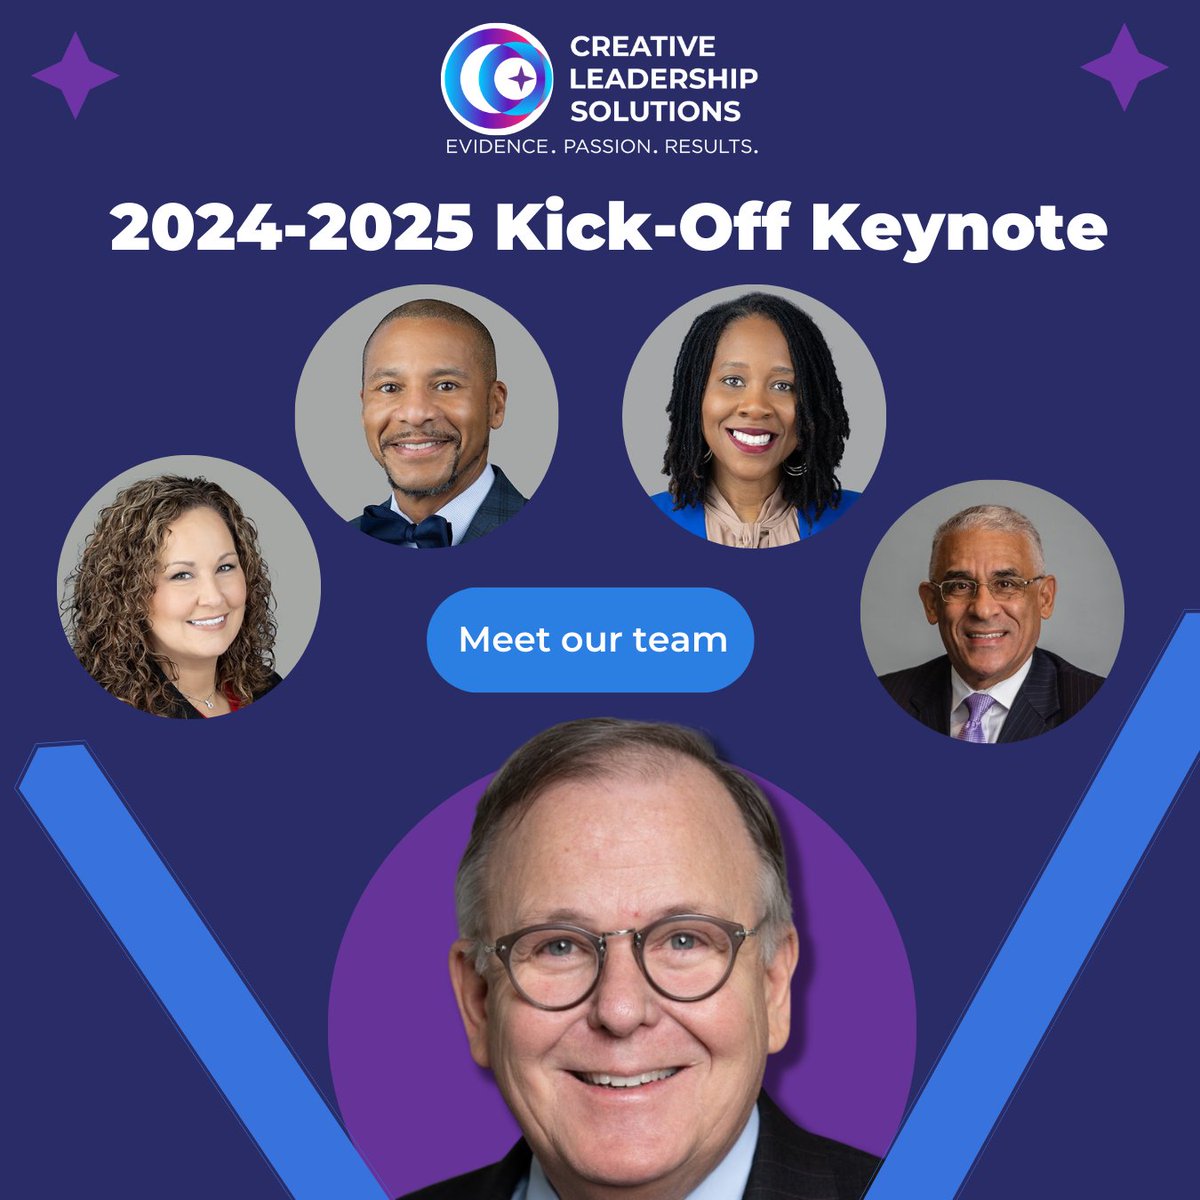 Book your summer and 24-25 keynotes with Dr. Douglas Reeves and a CLS Associate today. To meet our team, and for a full list of keynotes, descriptions, and to book today, visit creativeleadership.net/keynotes.